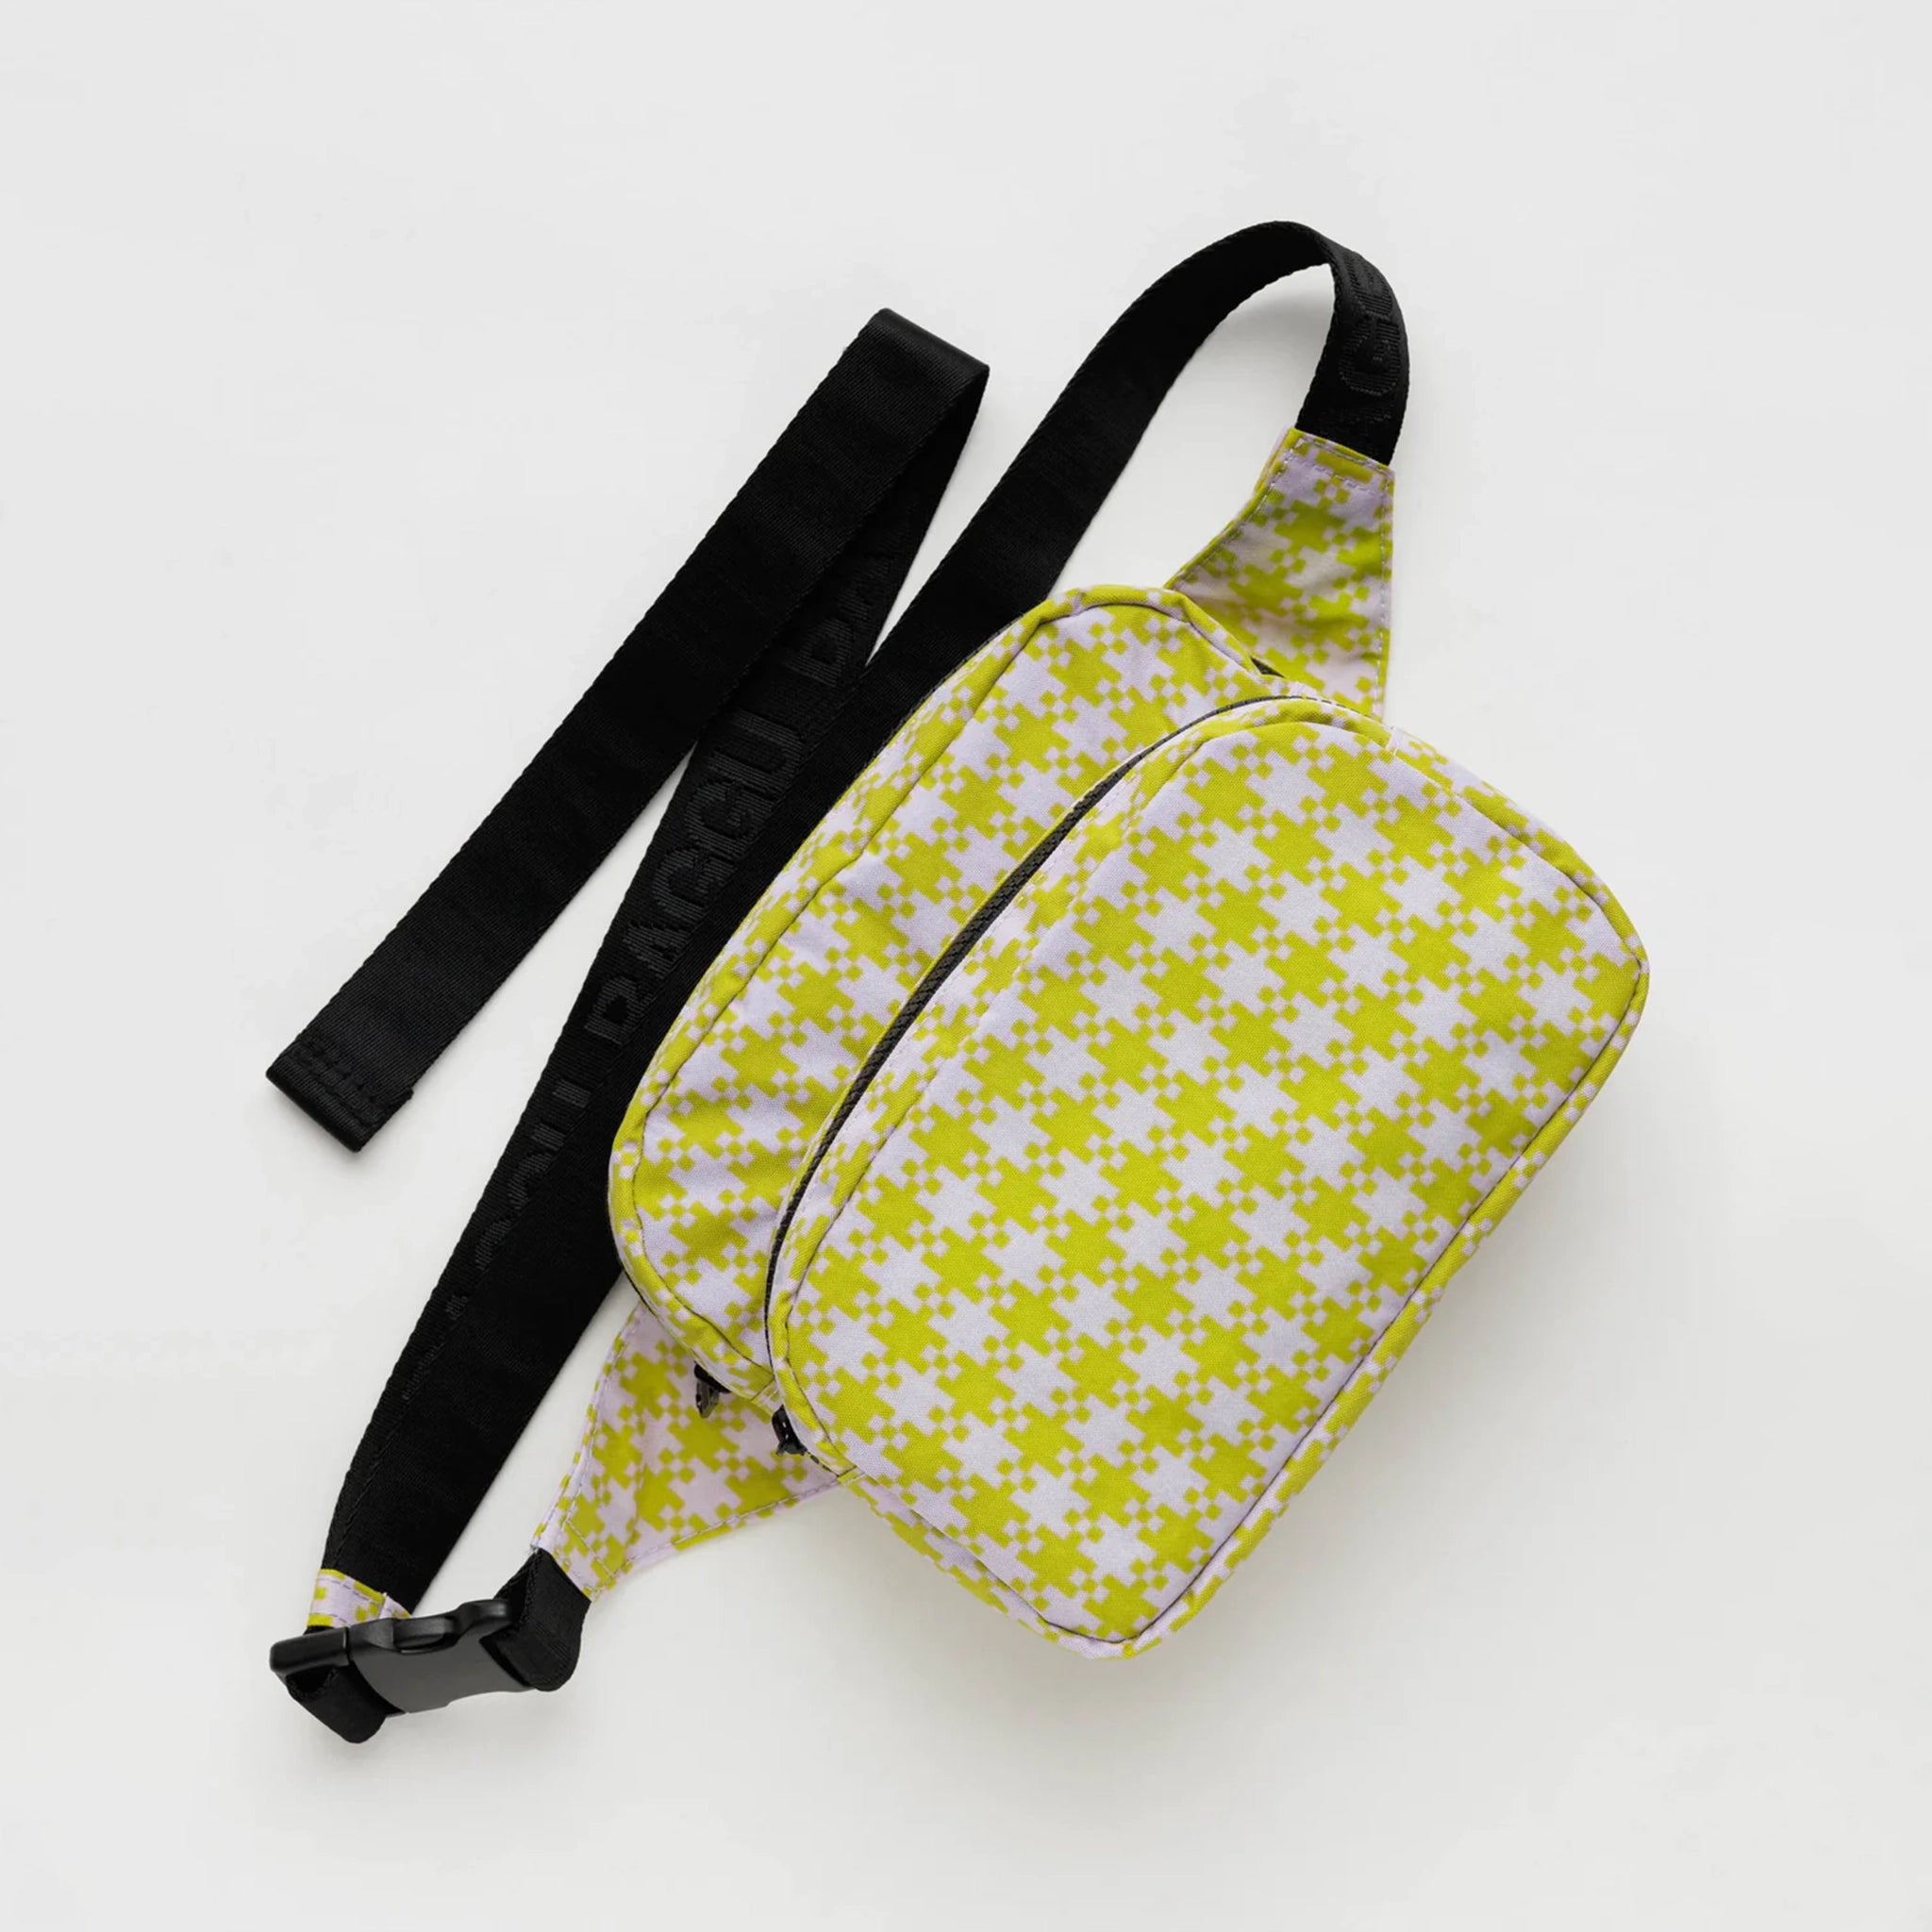 A light pink and lime green gingham nylon fanny pack with two zipper pockets and a black adjustable strap.